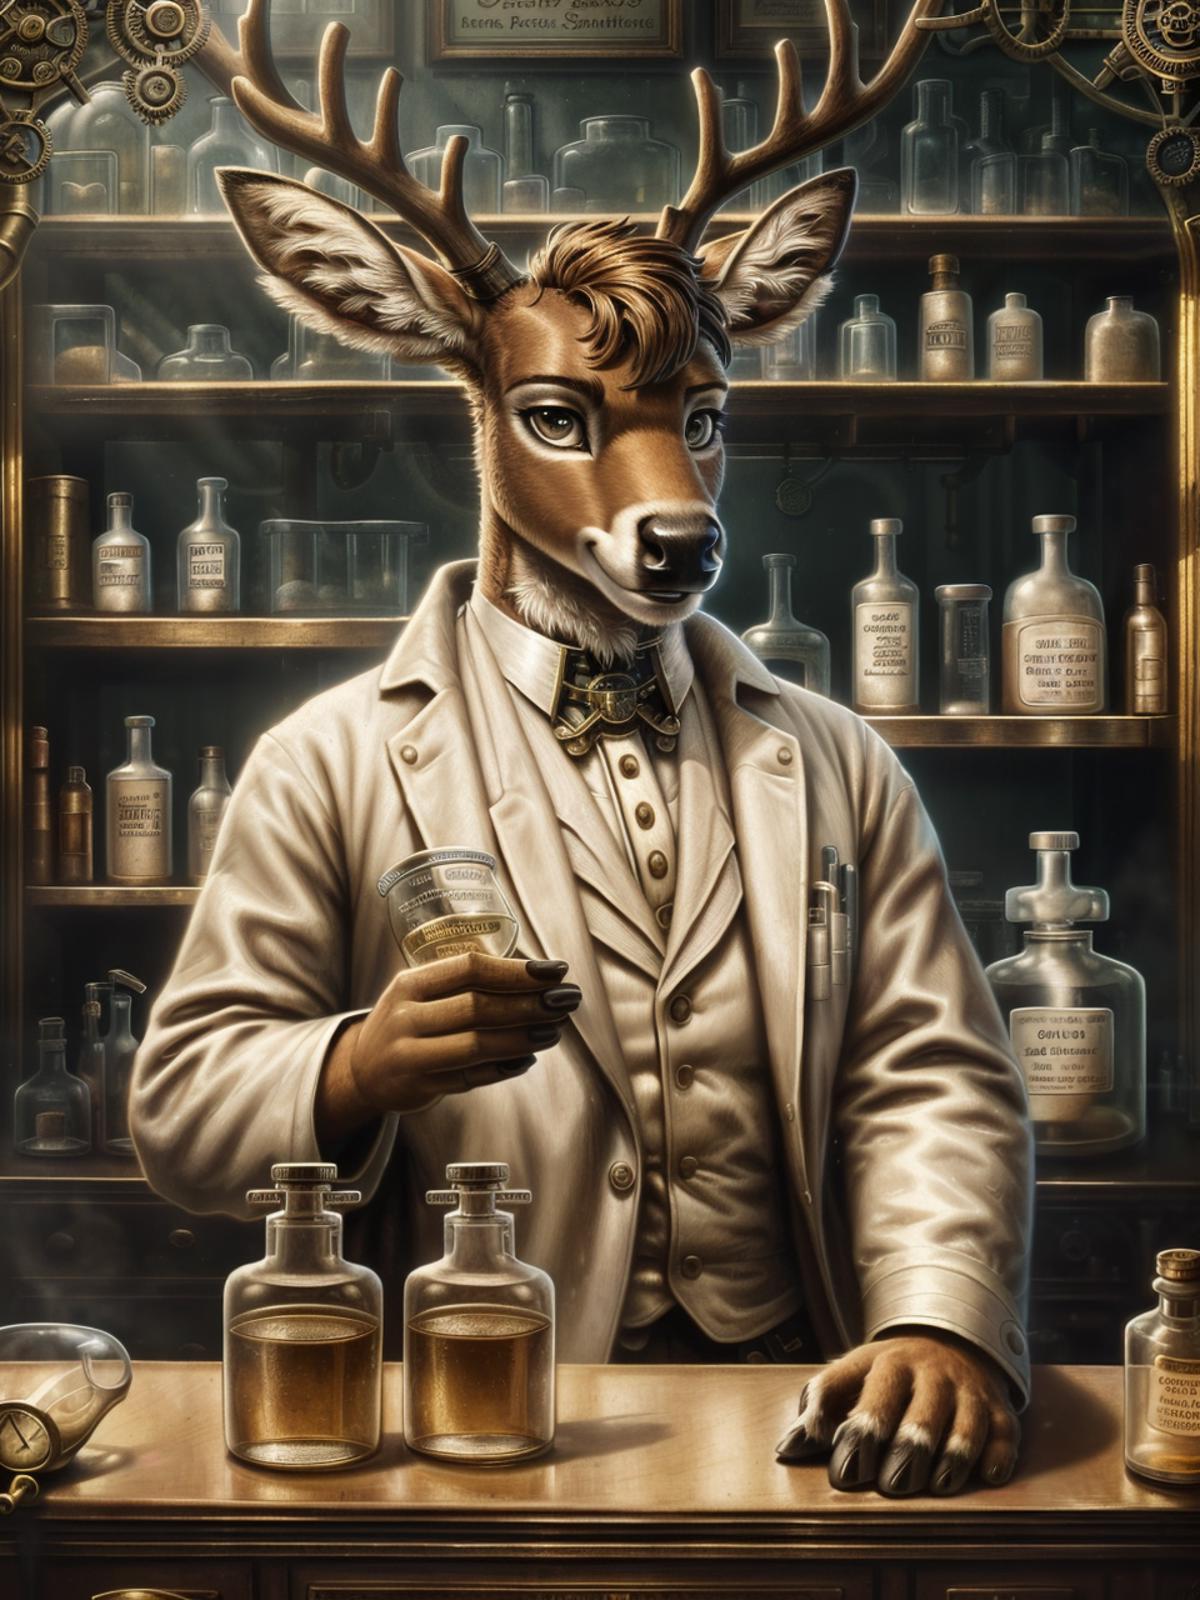 A deer wearing a lab coat and holding a beaker.